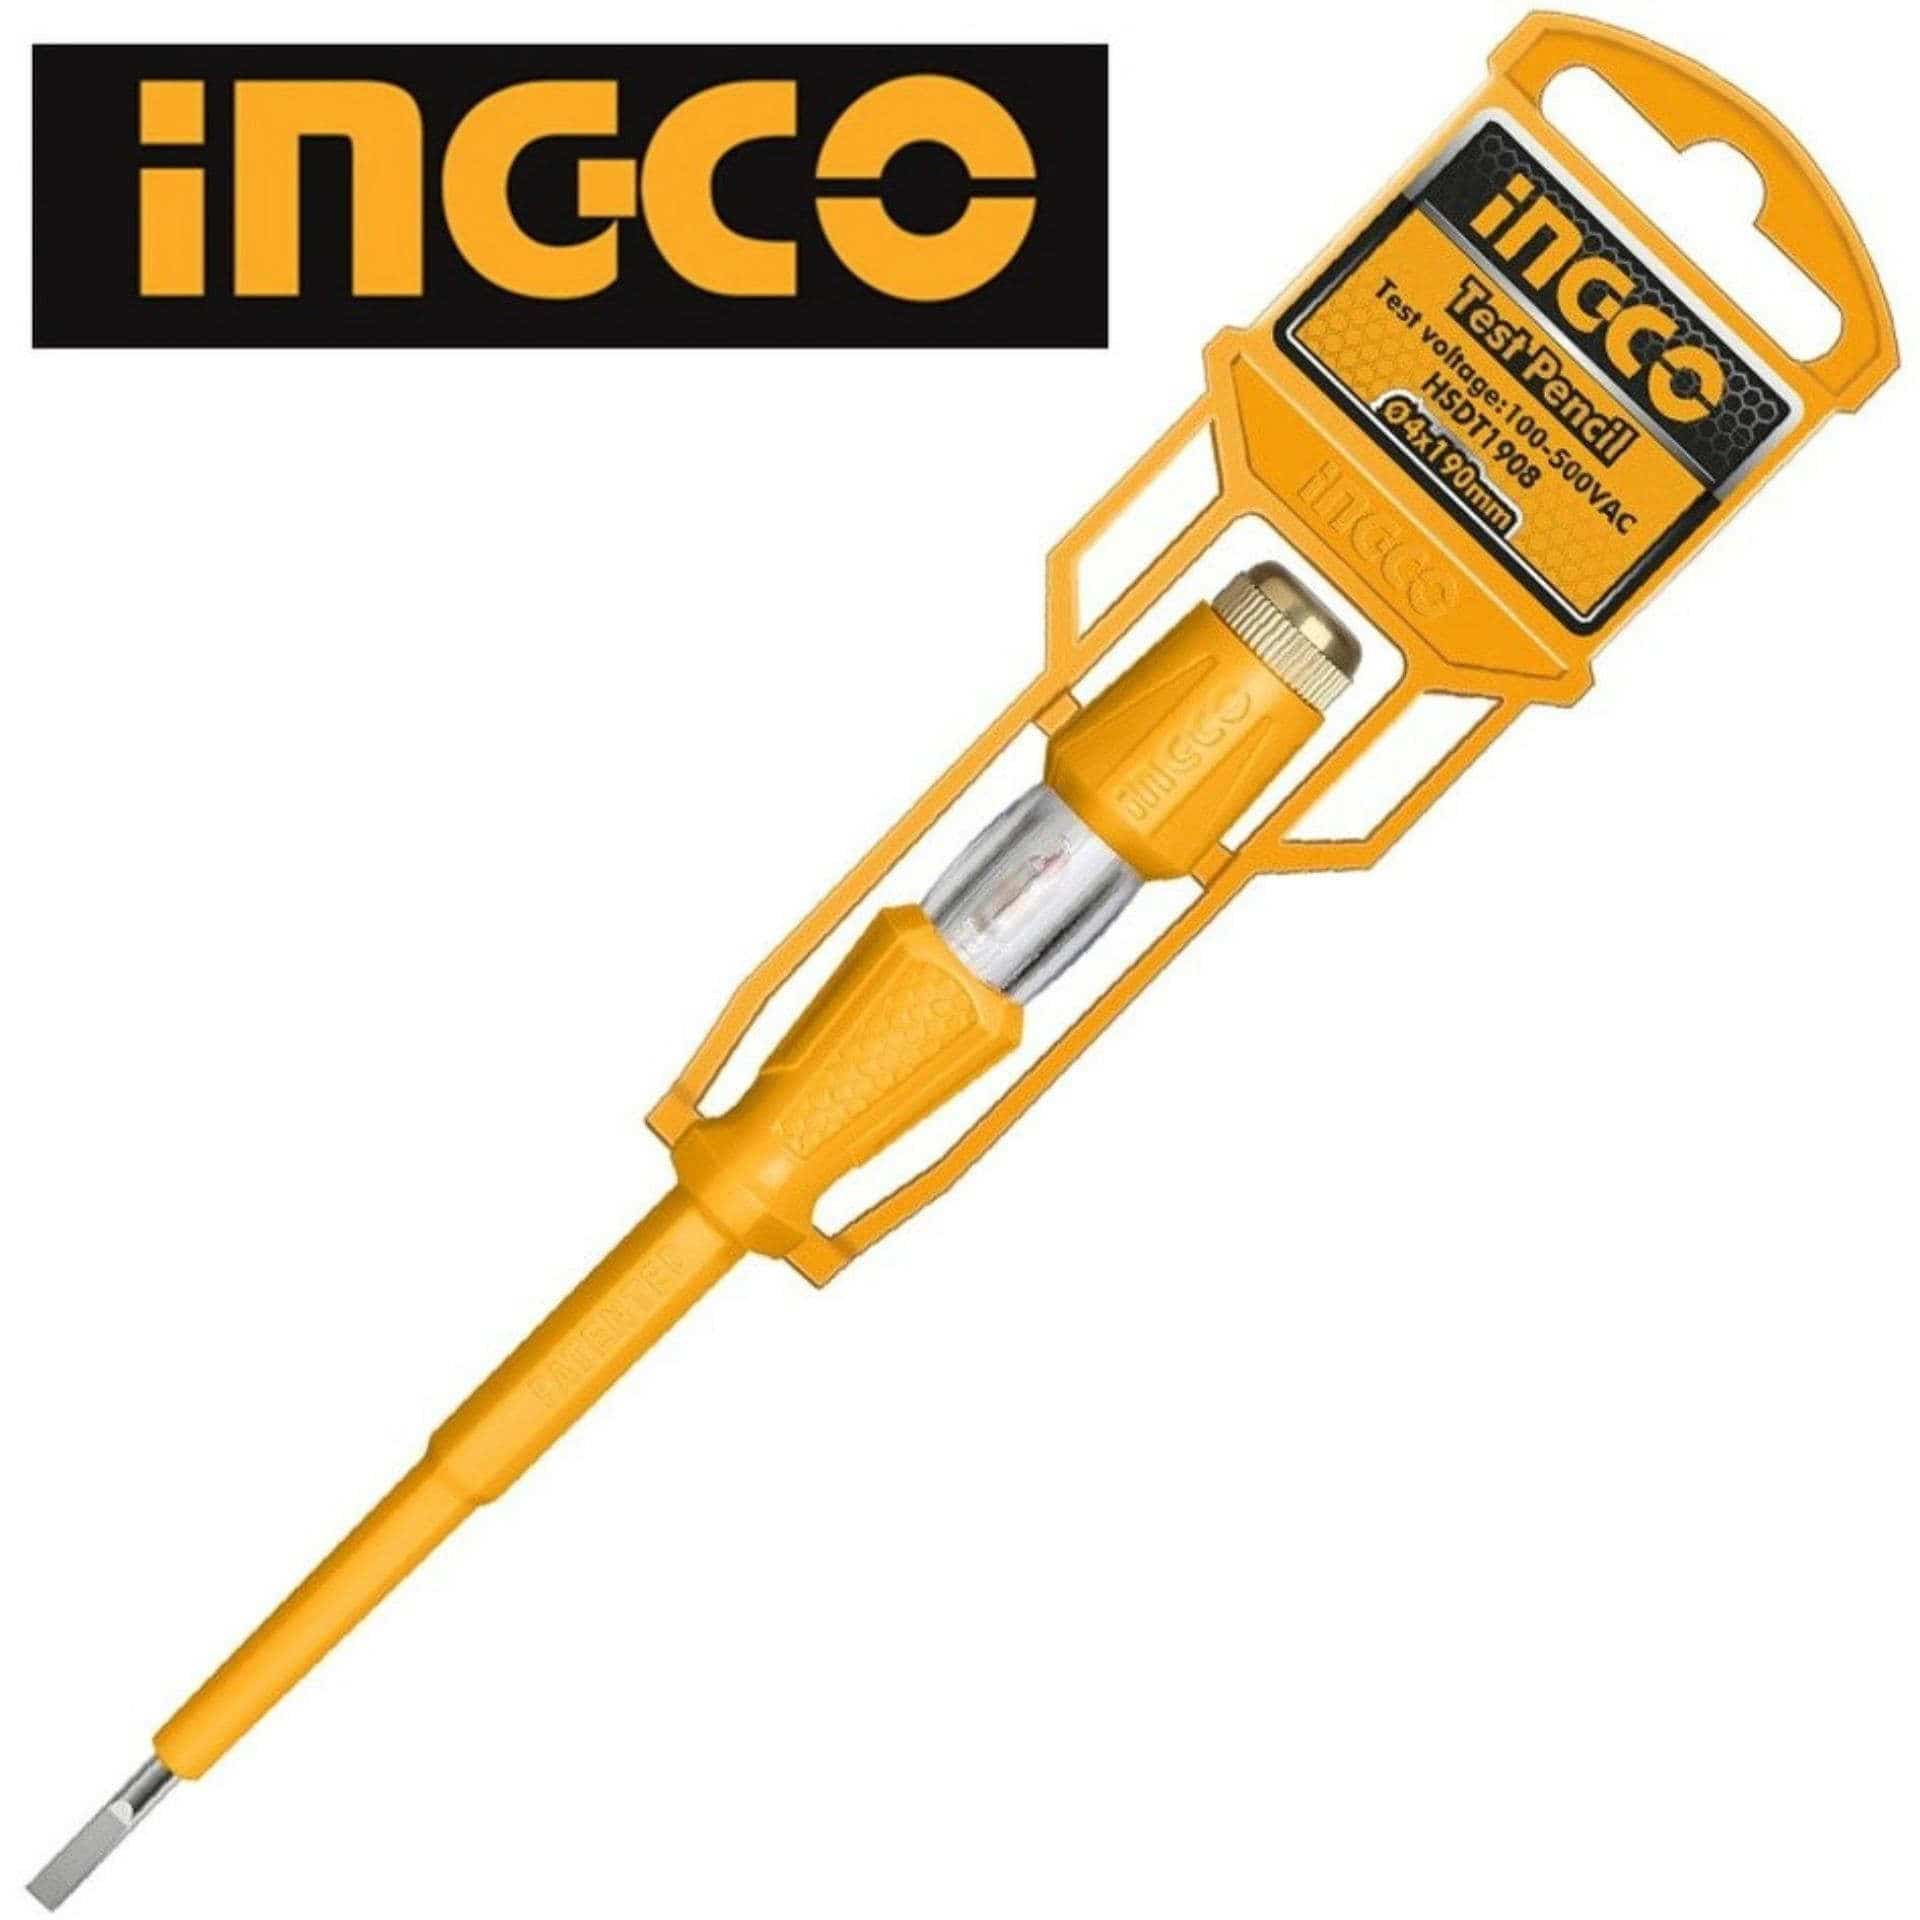 Ingco Voltage Tester - Slotted Screwdriver | Supply Master | Accra, Ghana Tools 4x190mm Building Steel Engineering Hardware tool